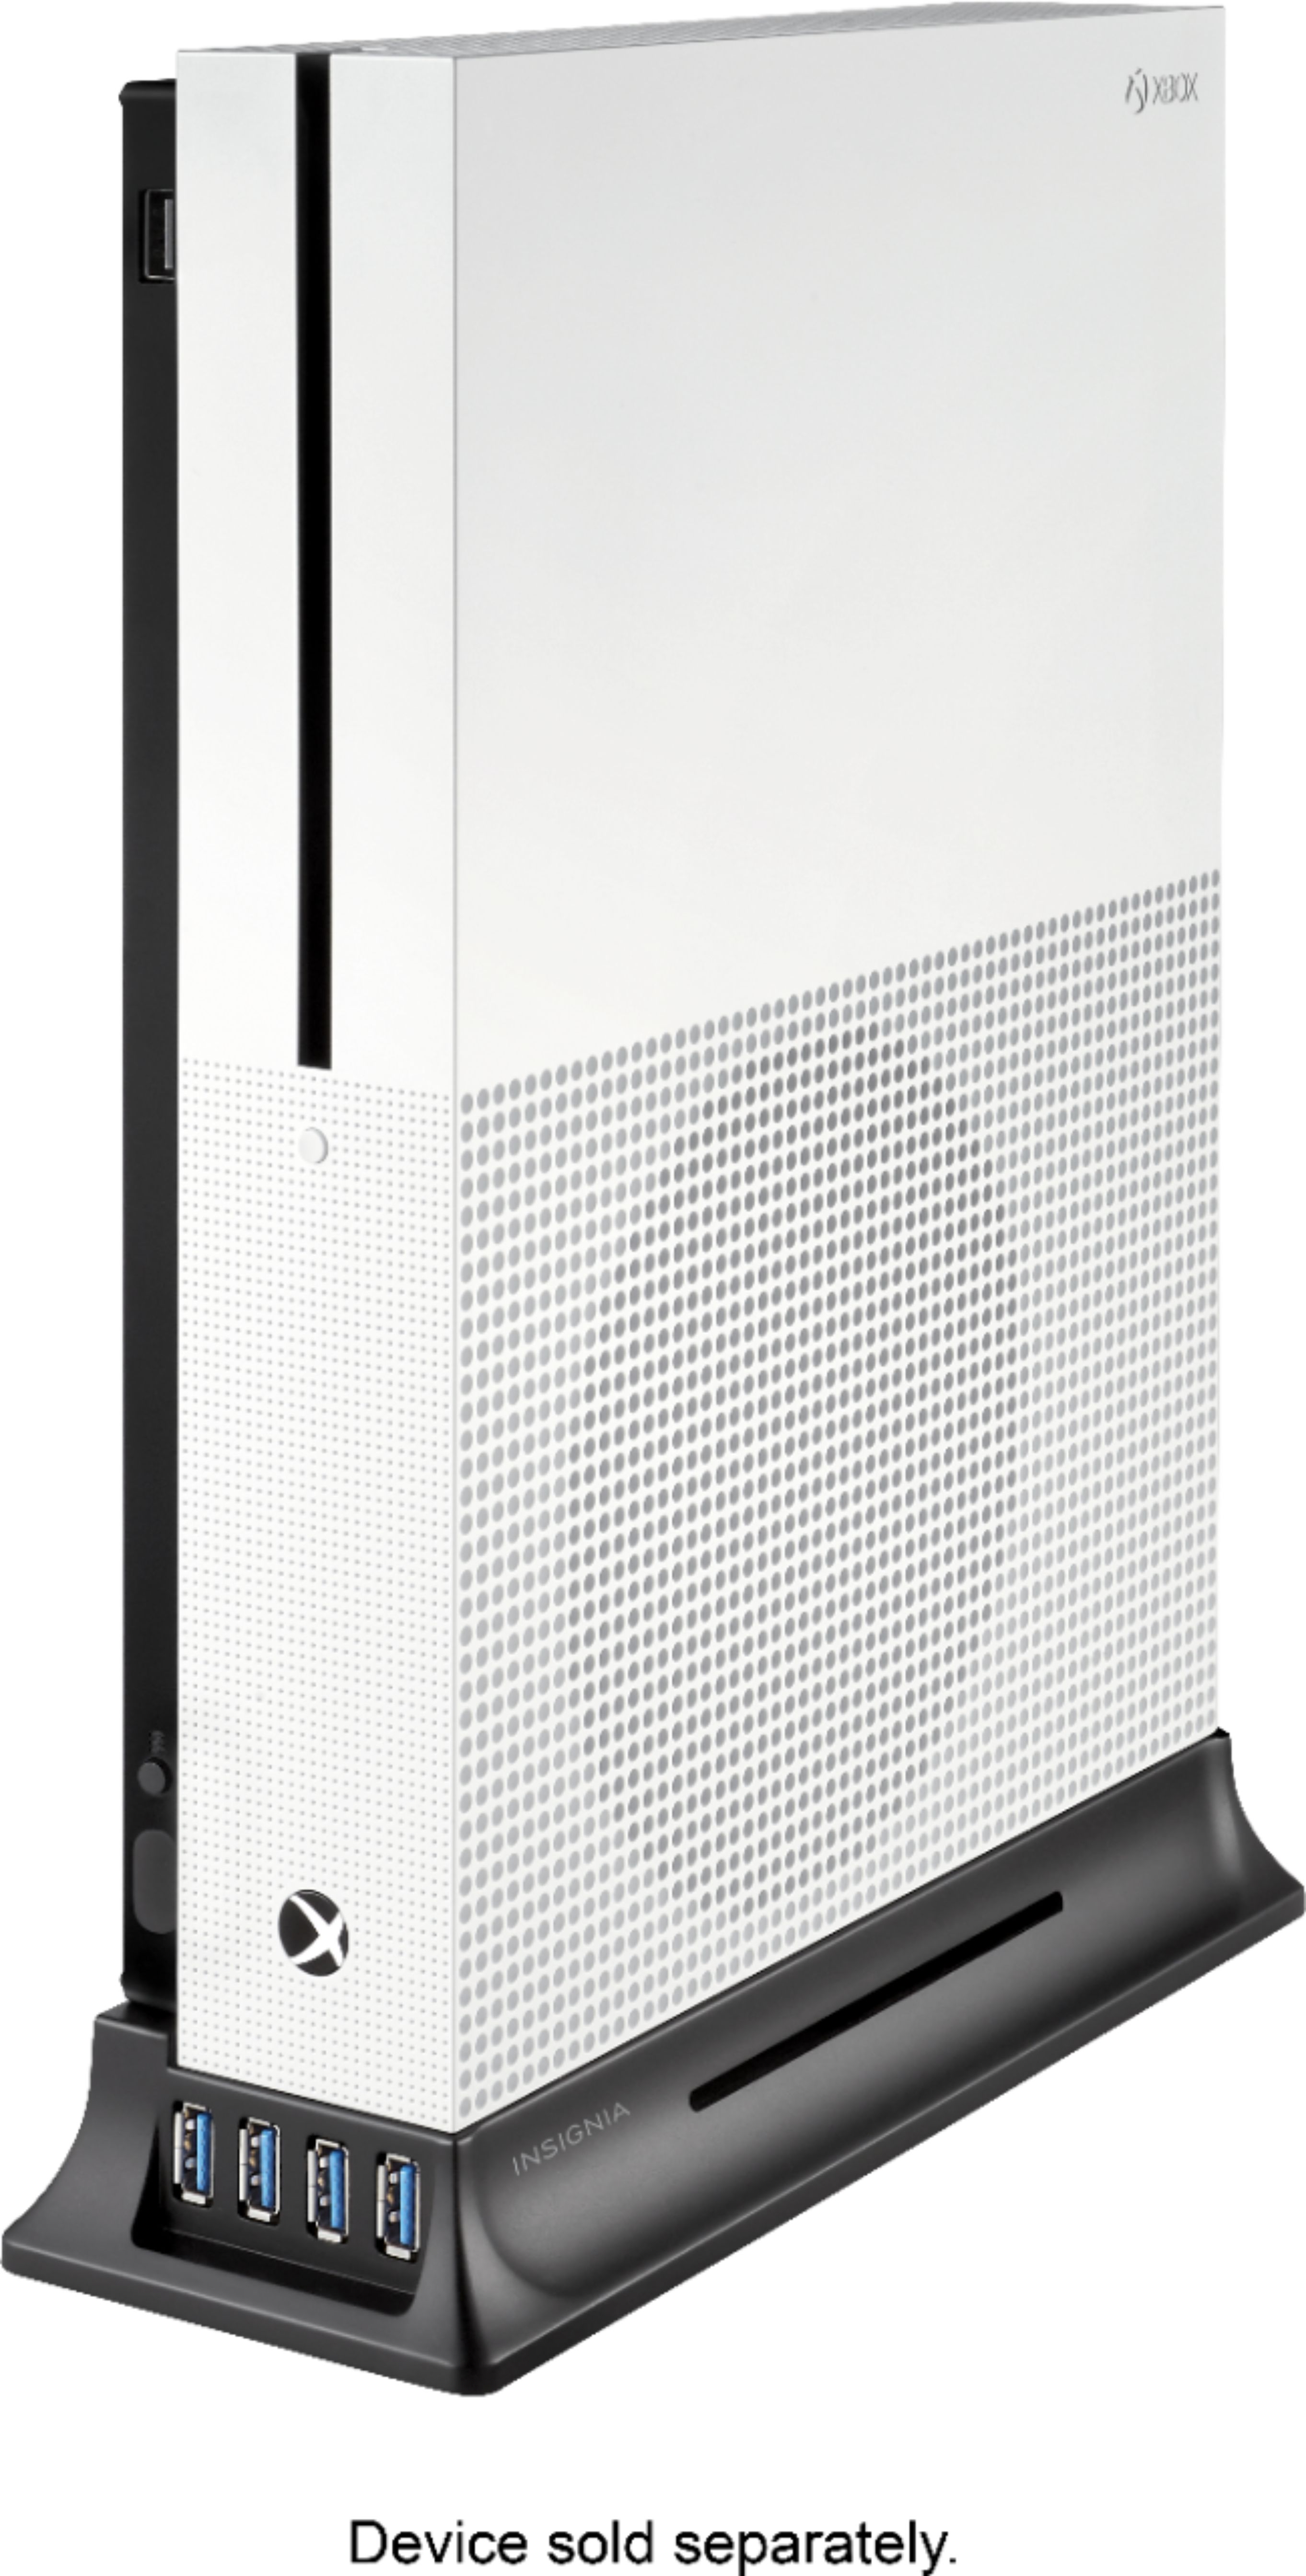 what is better xbox one x or xbox one s